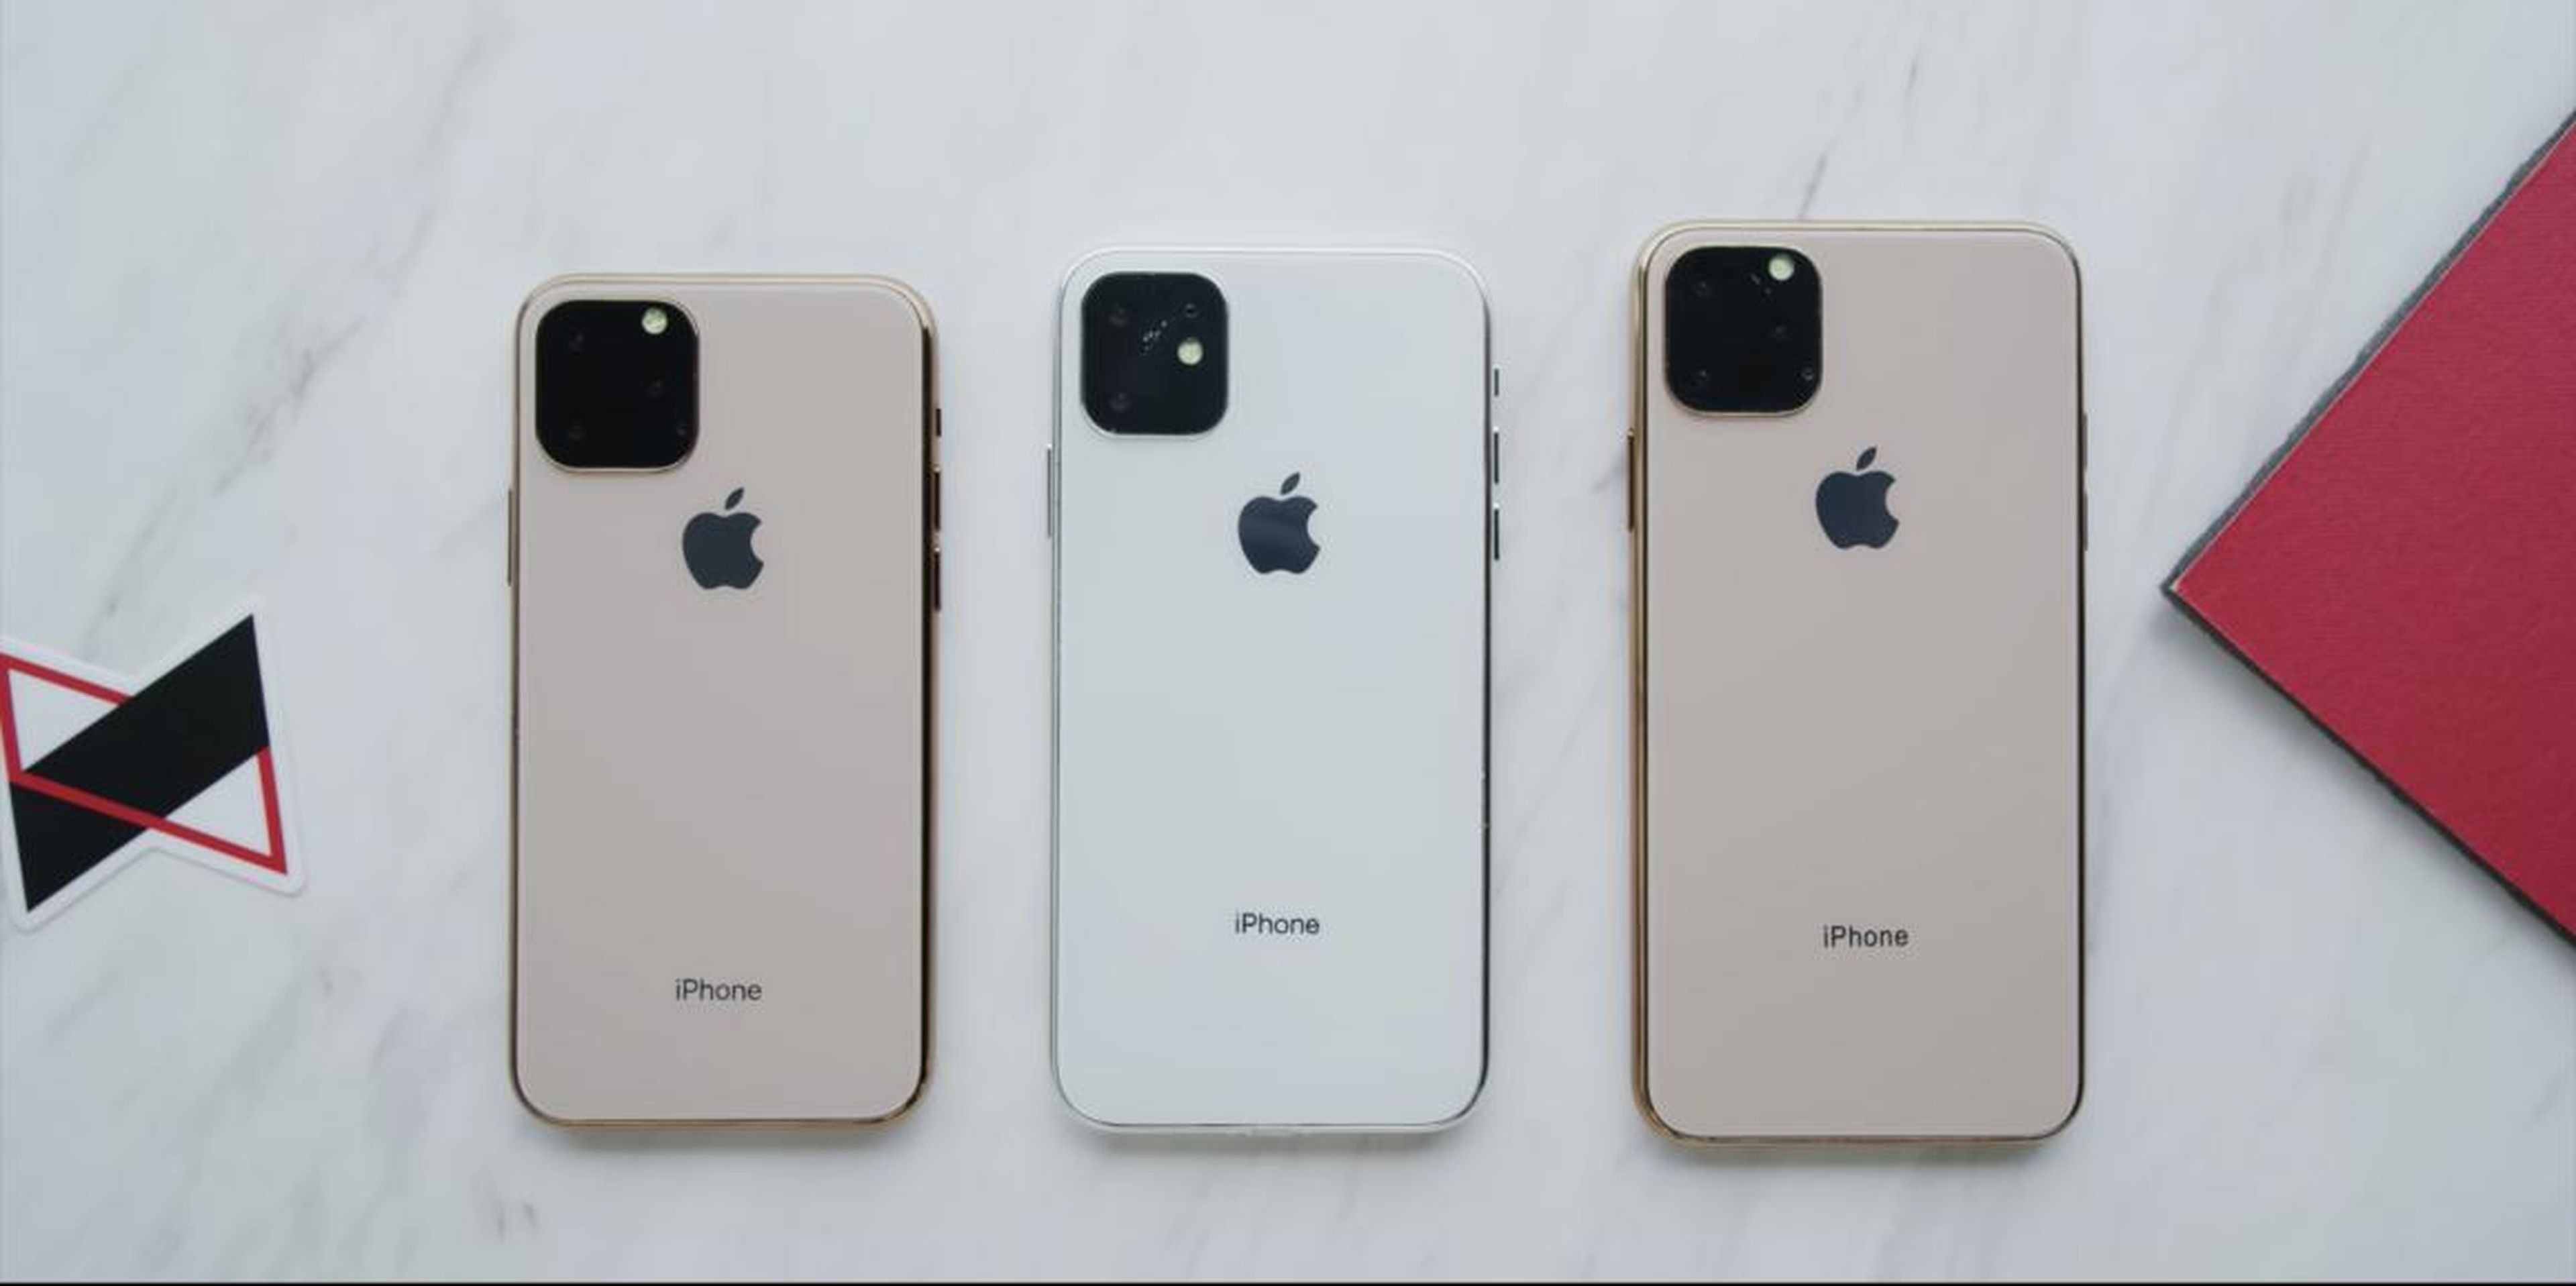 Hopefully Apple drops the confusing Roman-numeral-and-letter name combination for its iPhones — lots of people still don't know how to pronounce XR and XS, though Apple insists it's "ten R" and "ten S" — and calls these phones the